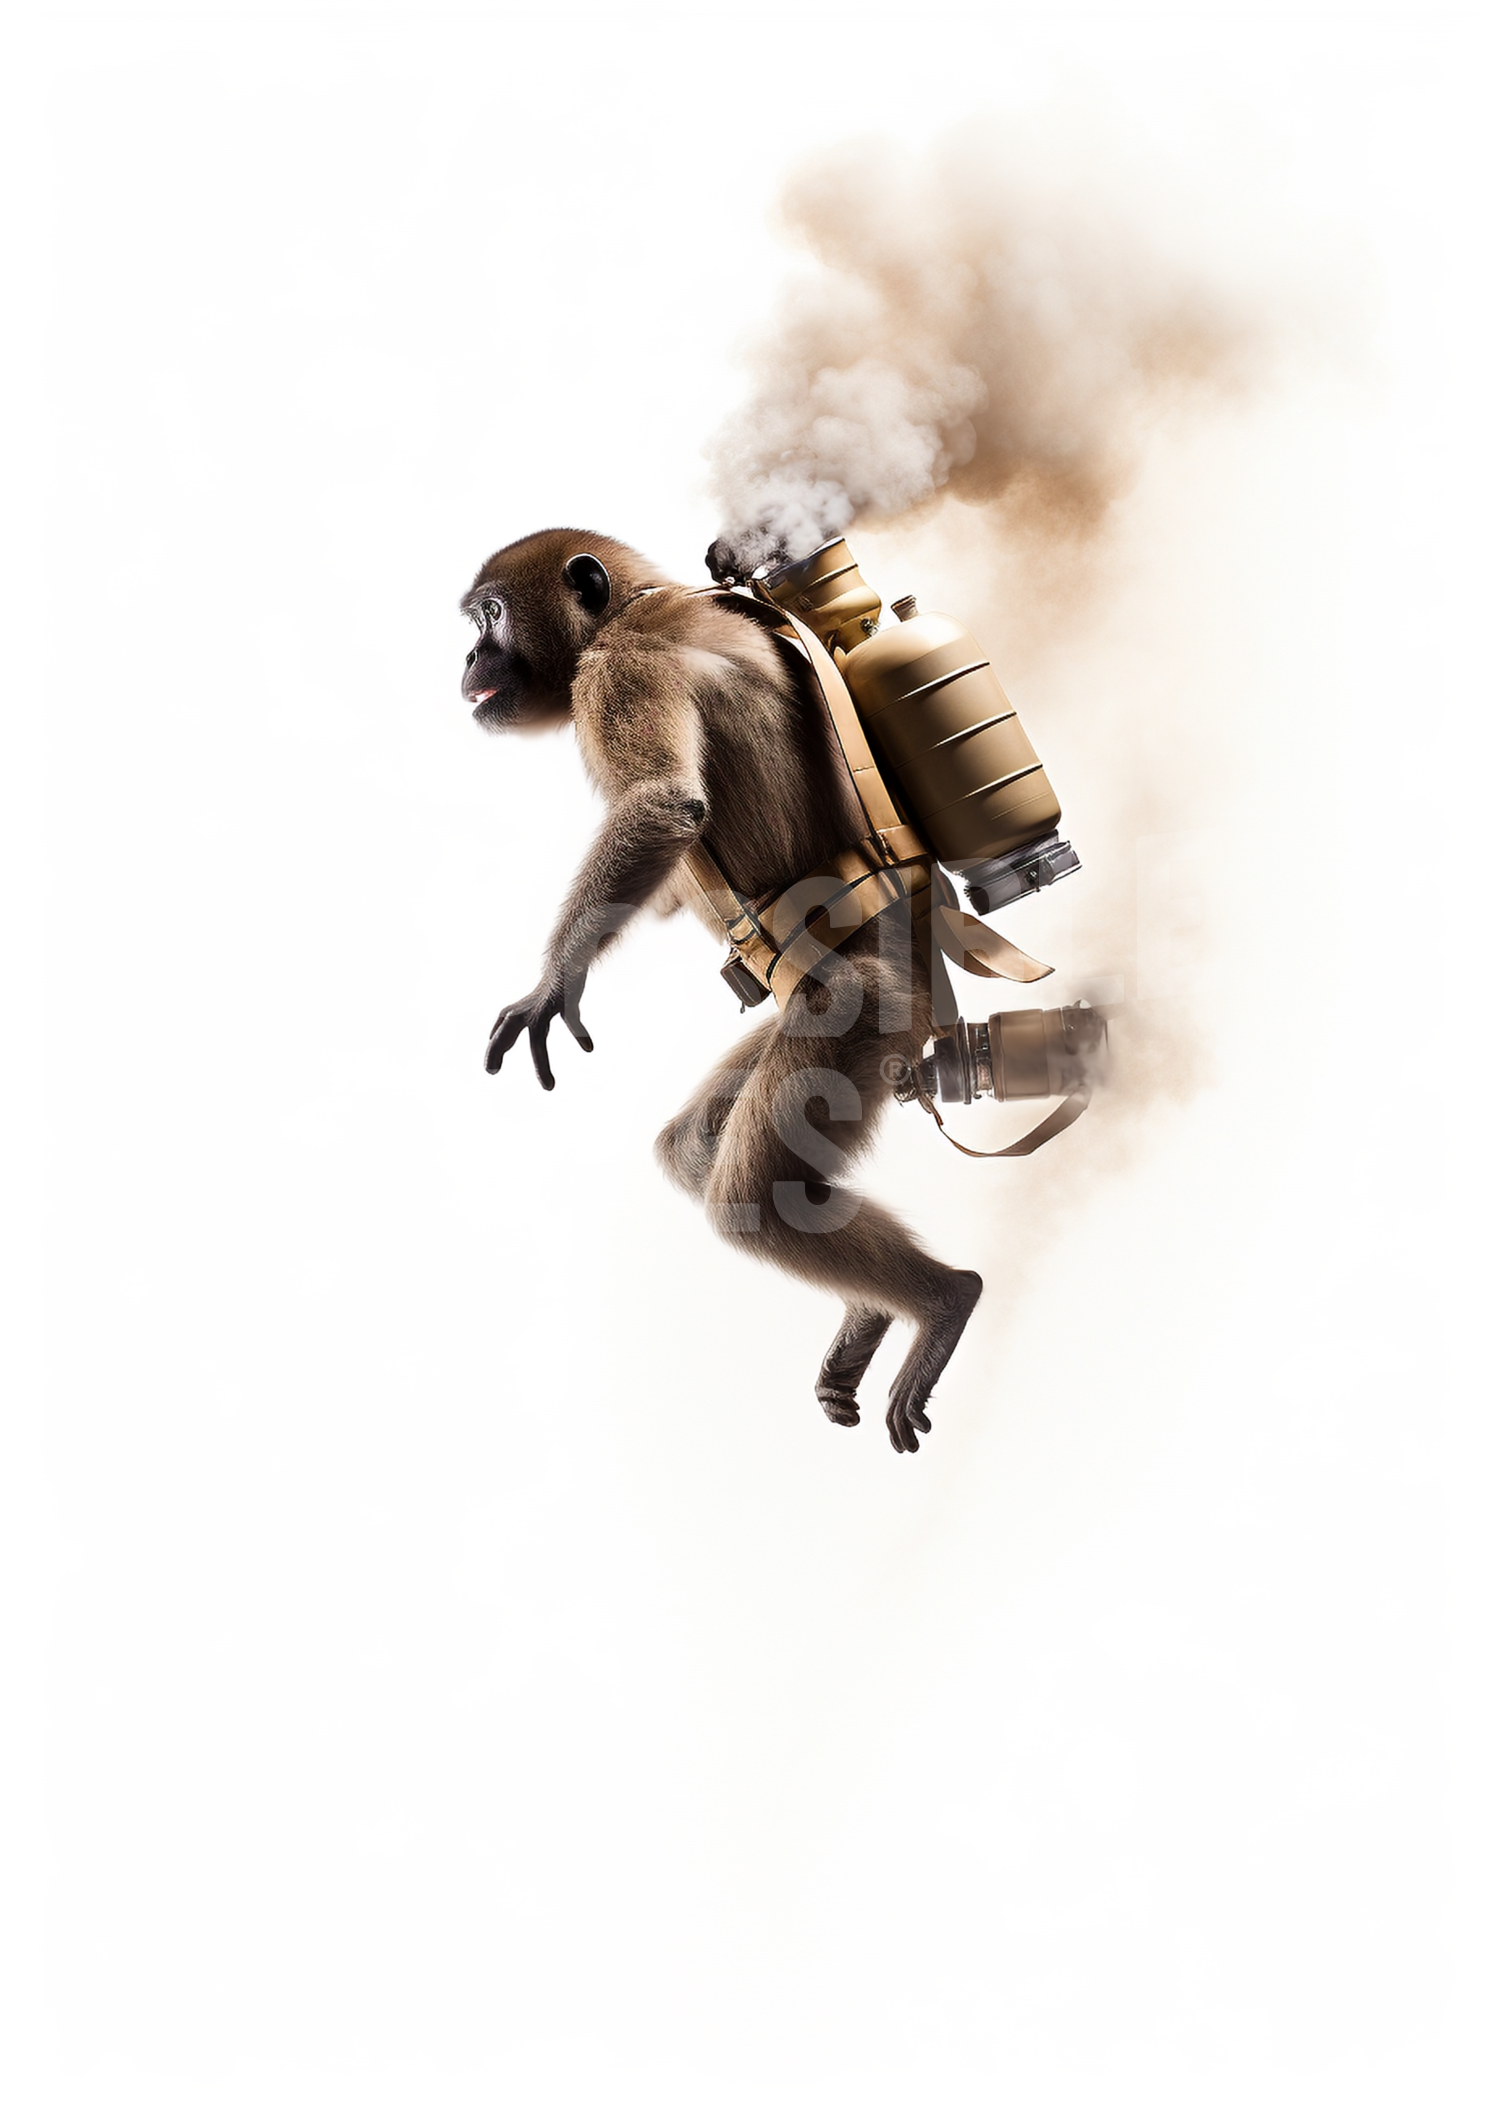 A monkey with a backpack is flying through the air